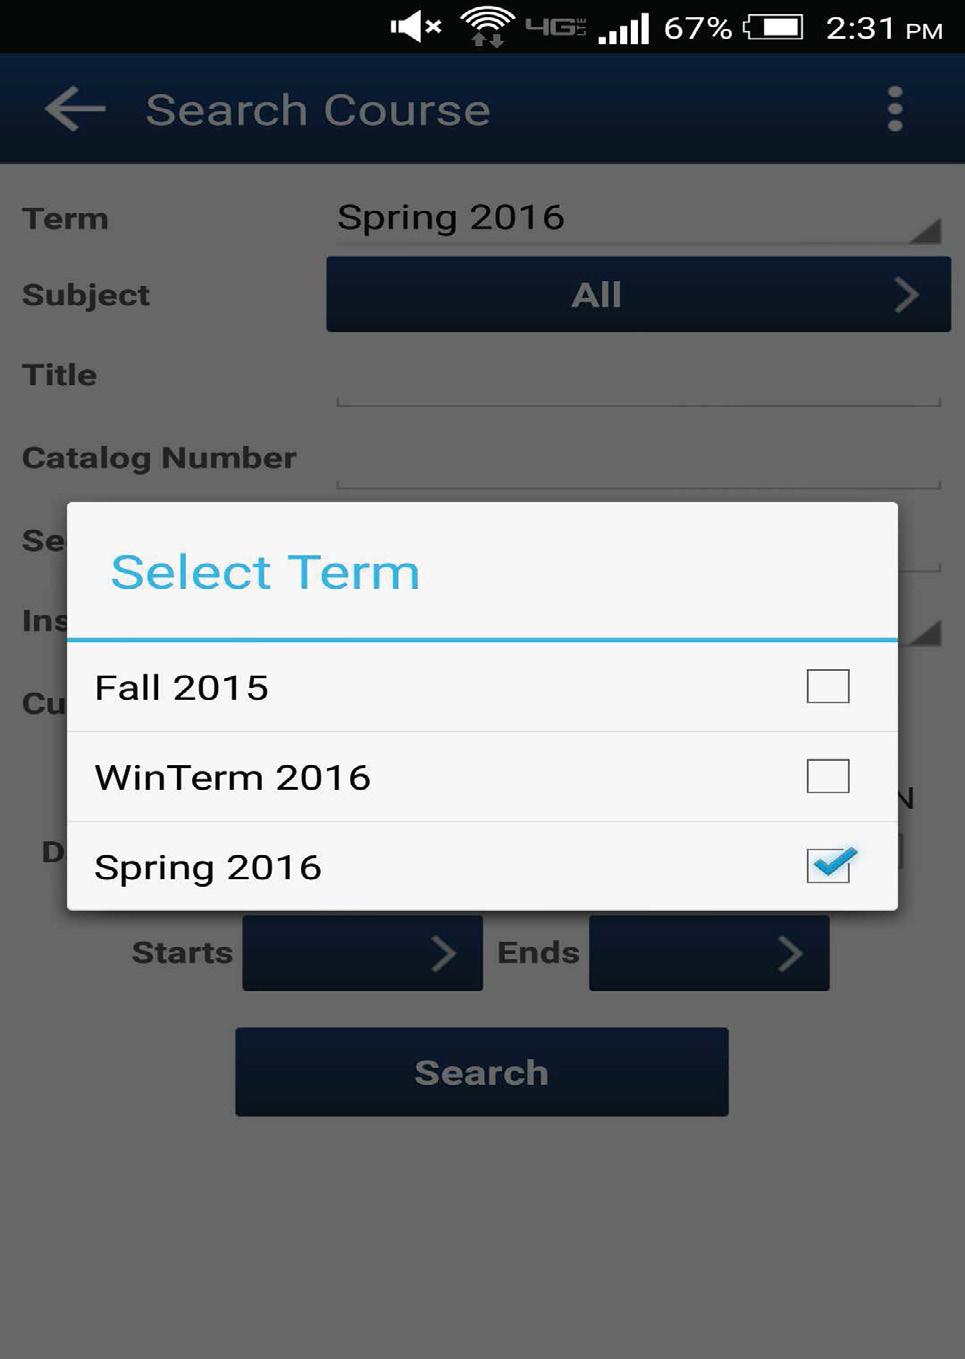 How to Enroll using the Stout Mobile App 4 After you select search it will bring you to this screen.